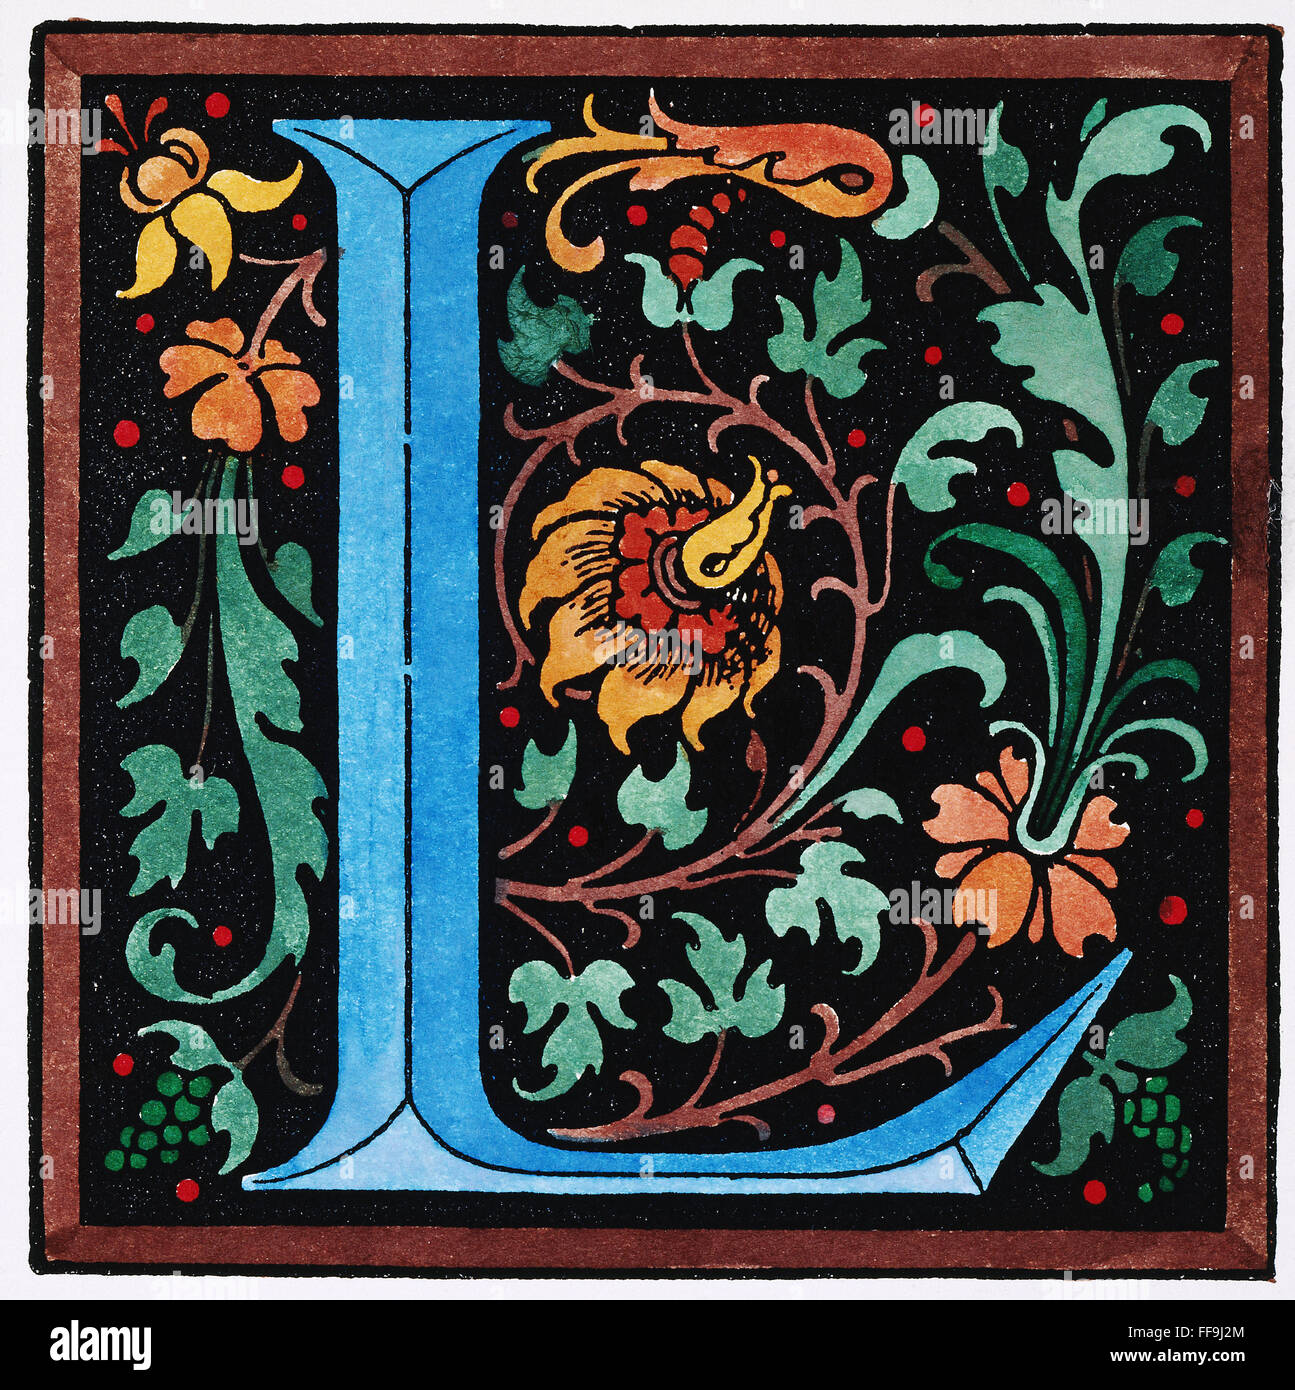 GERMAN INITIAL 'L'. /nInitial 'L' from a late 19th century German revival of Florentine Renaissance initials. Stock Photo